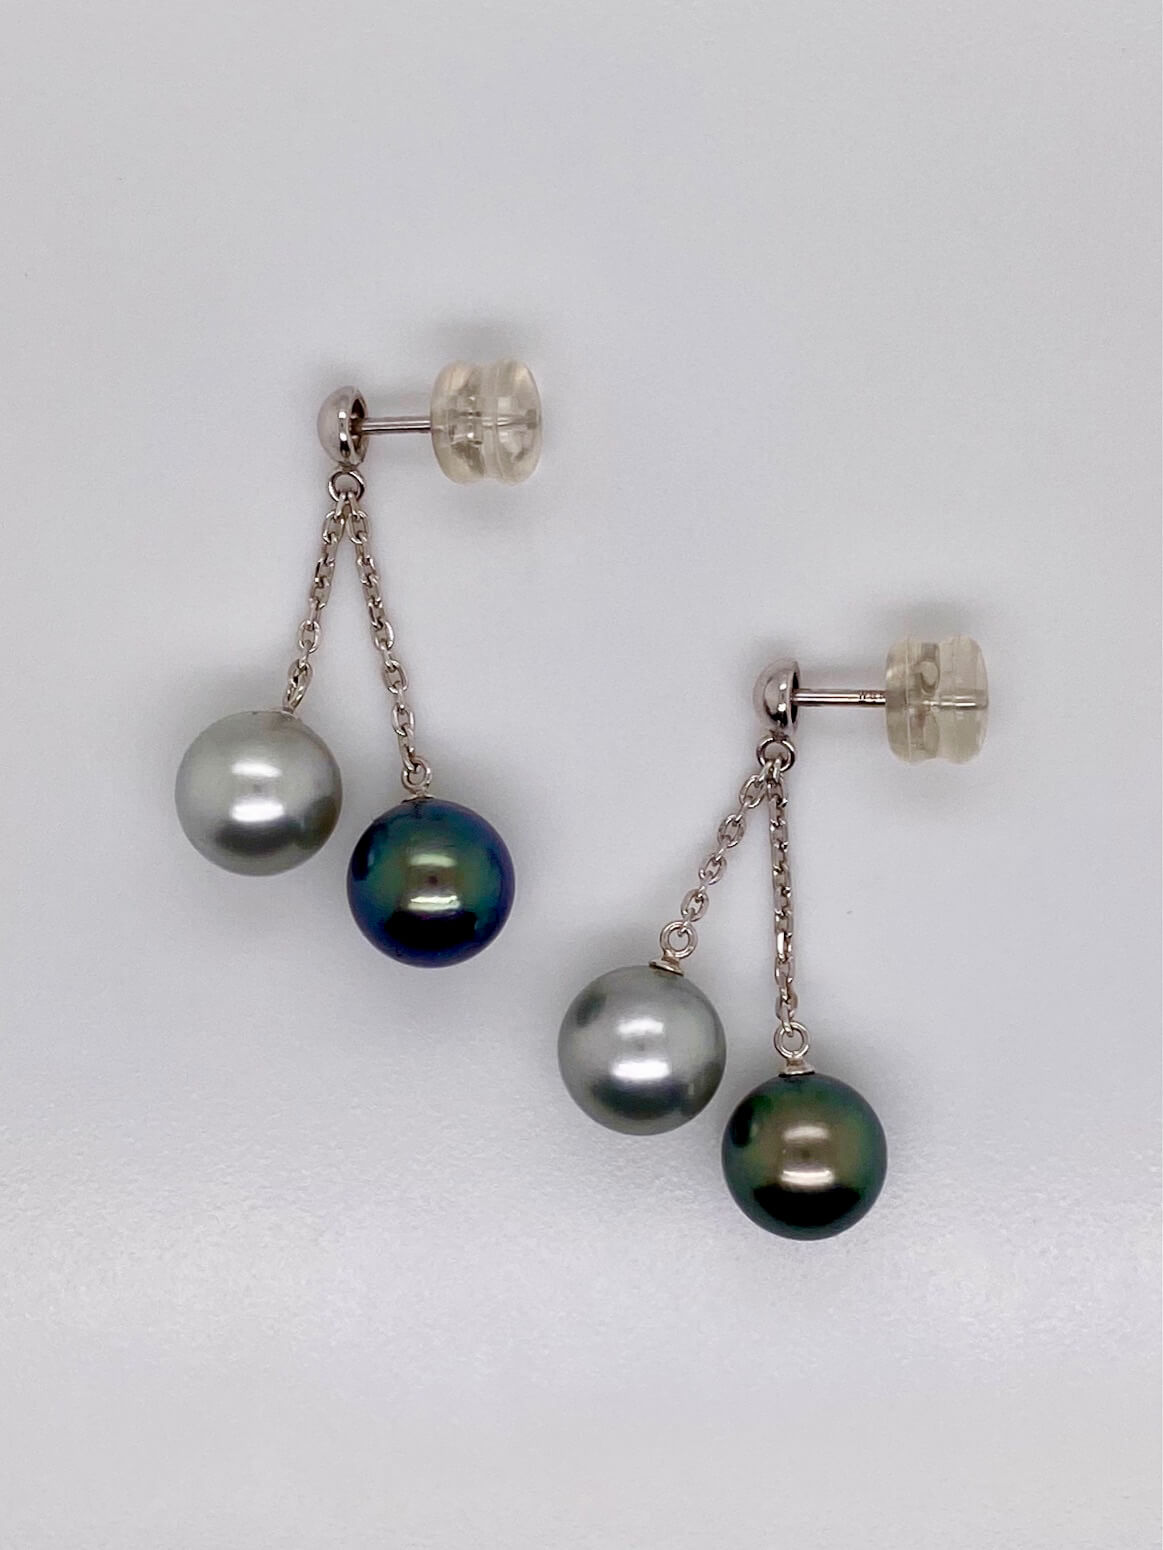 Earrings - Forever, Together - Tahia Pearls - Exquisite Tahitian Pearls